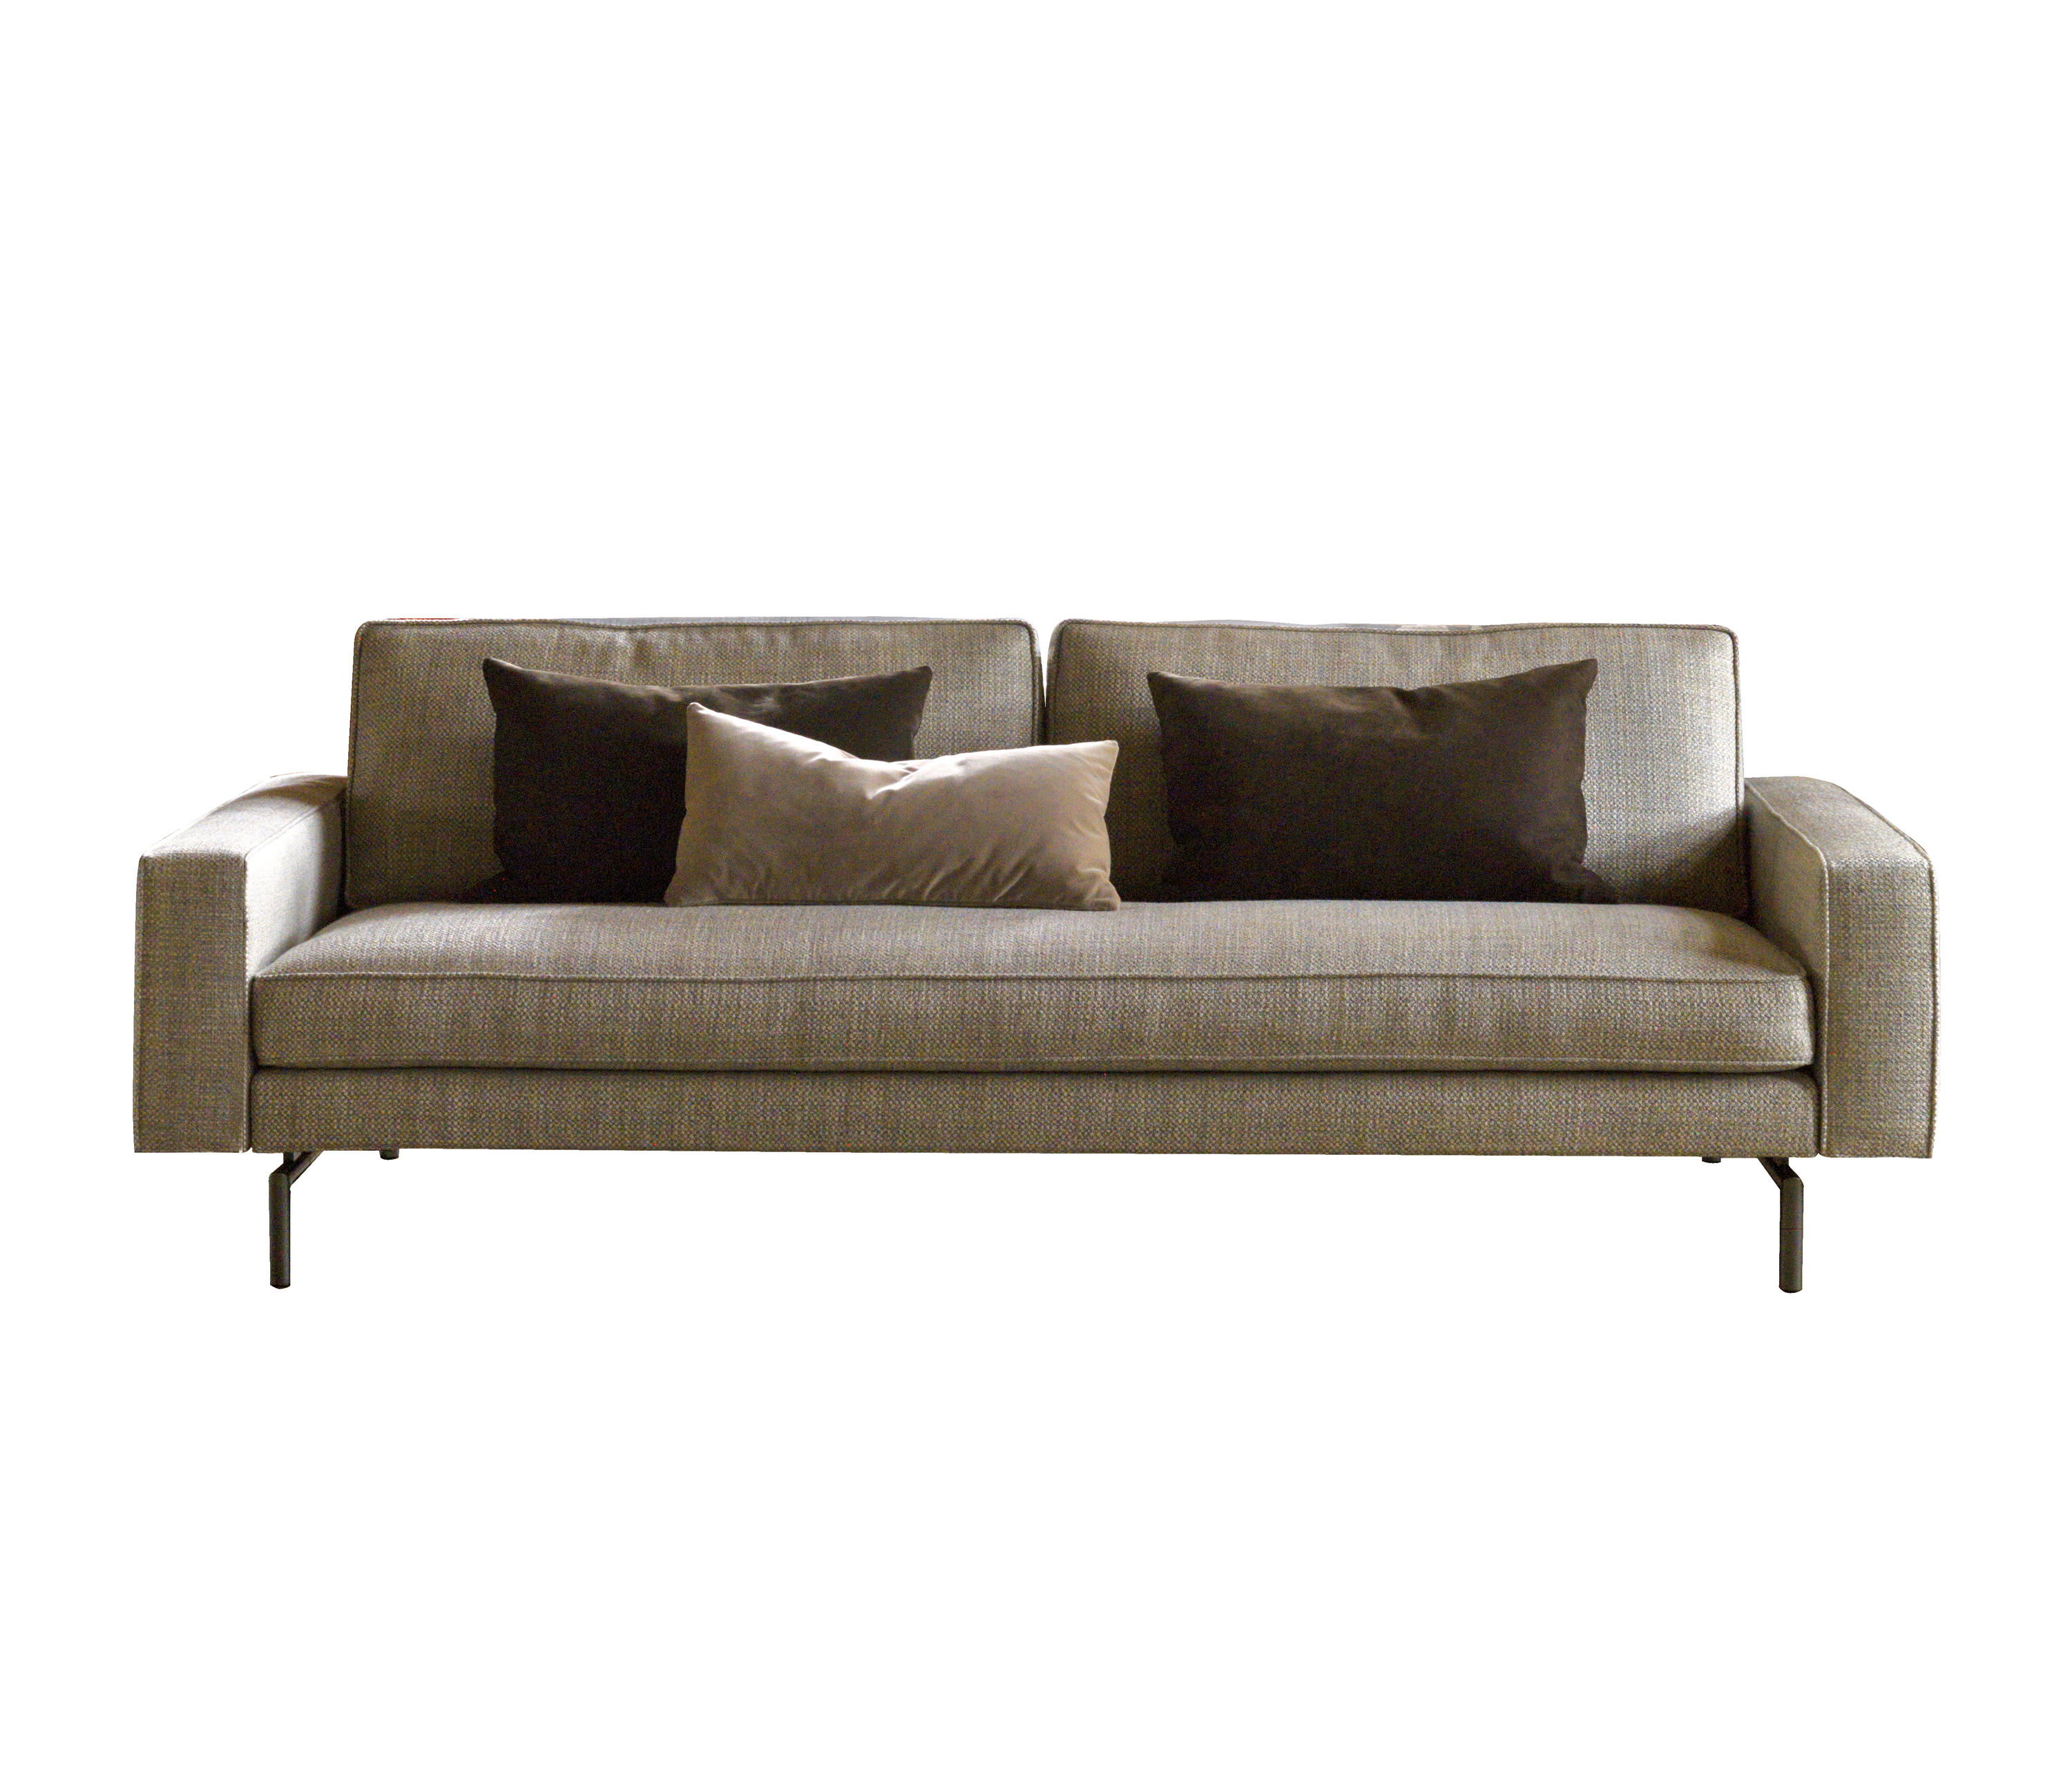 IRVING - Sofas from Verzelloni | Architonic